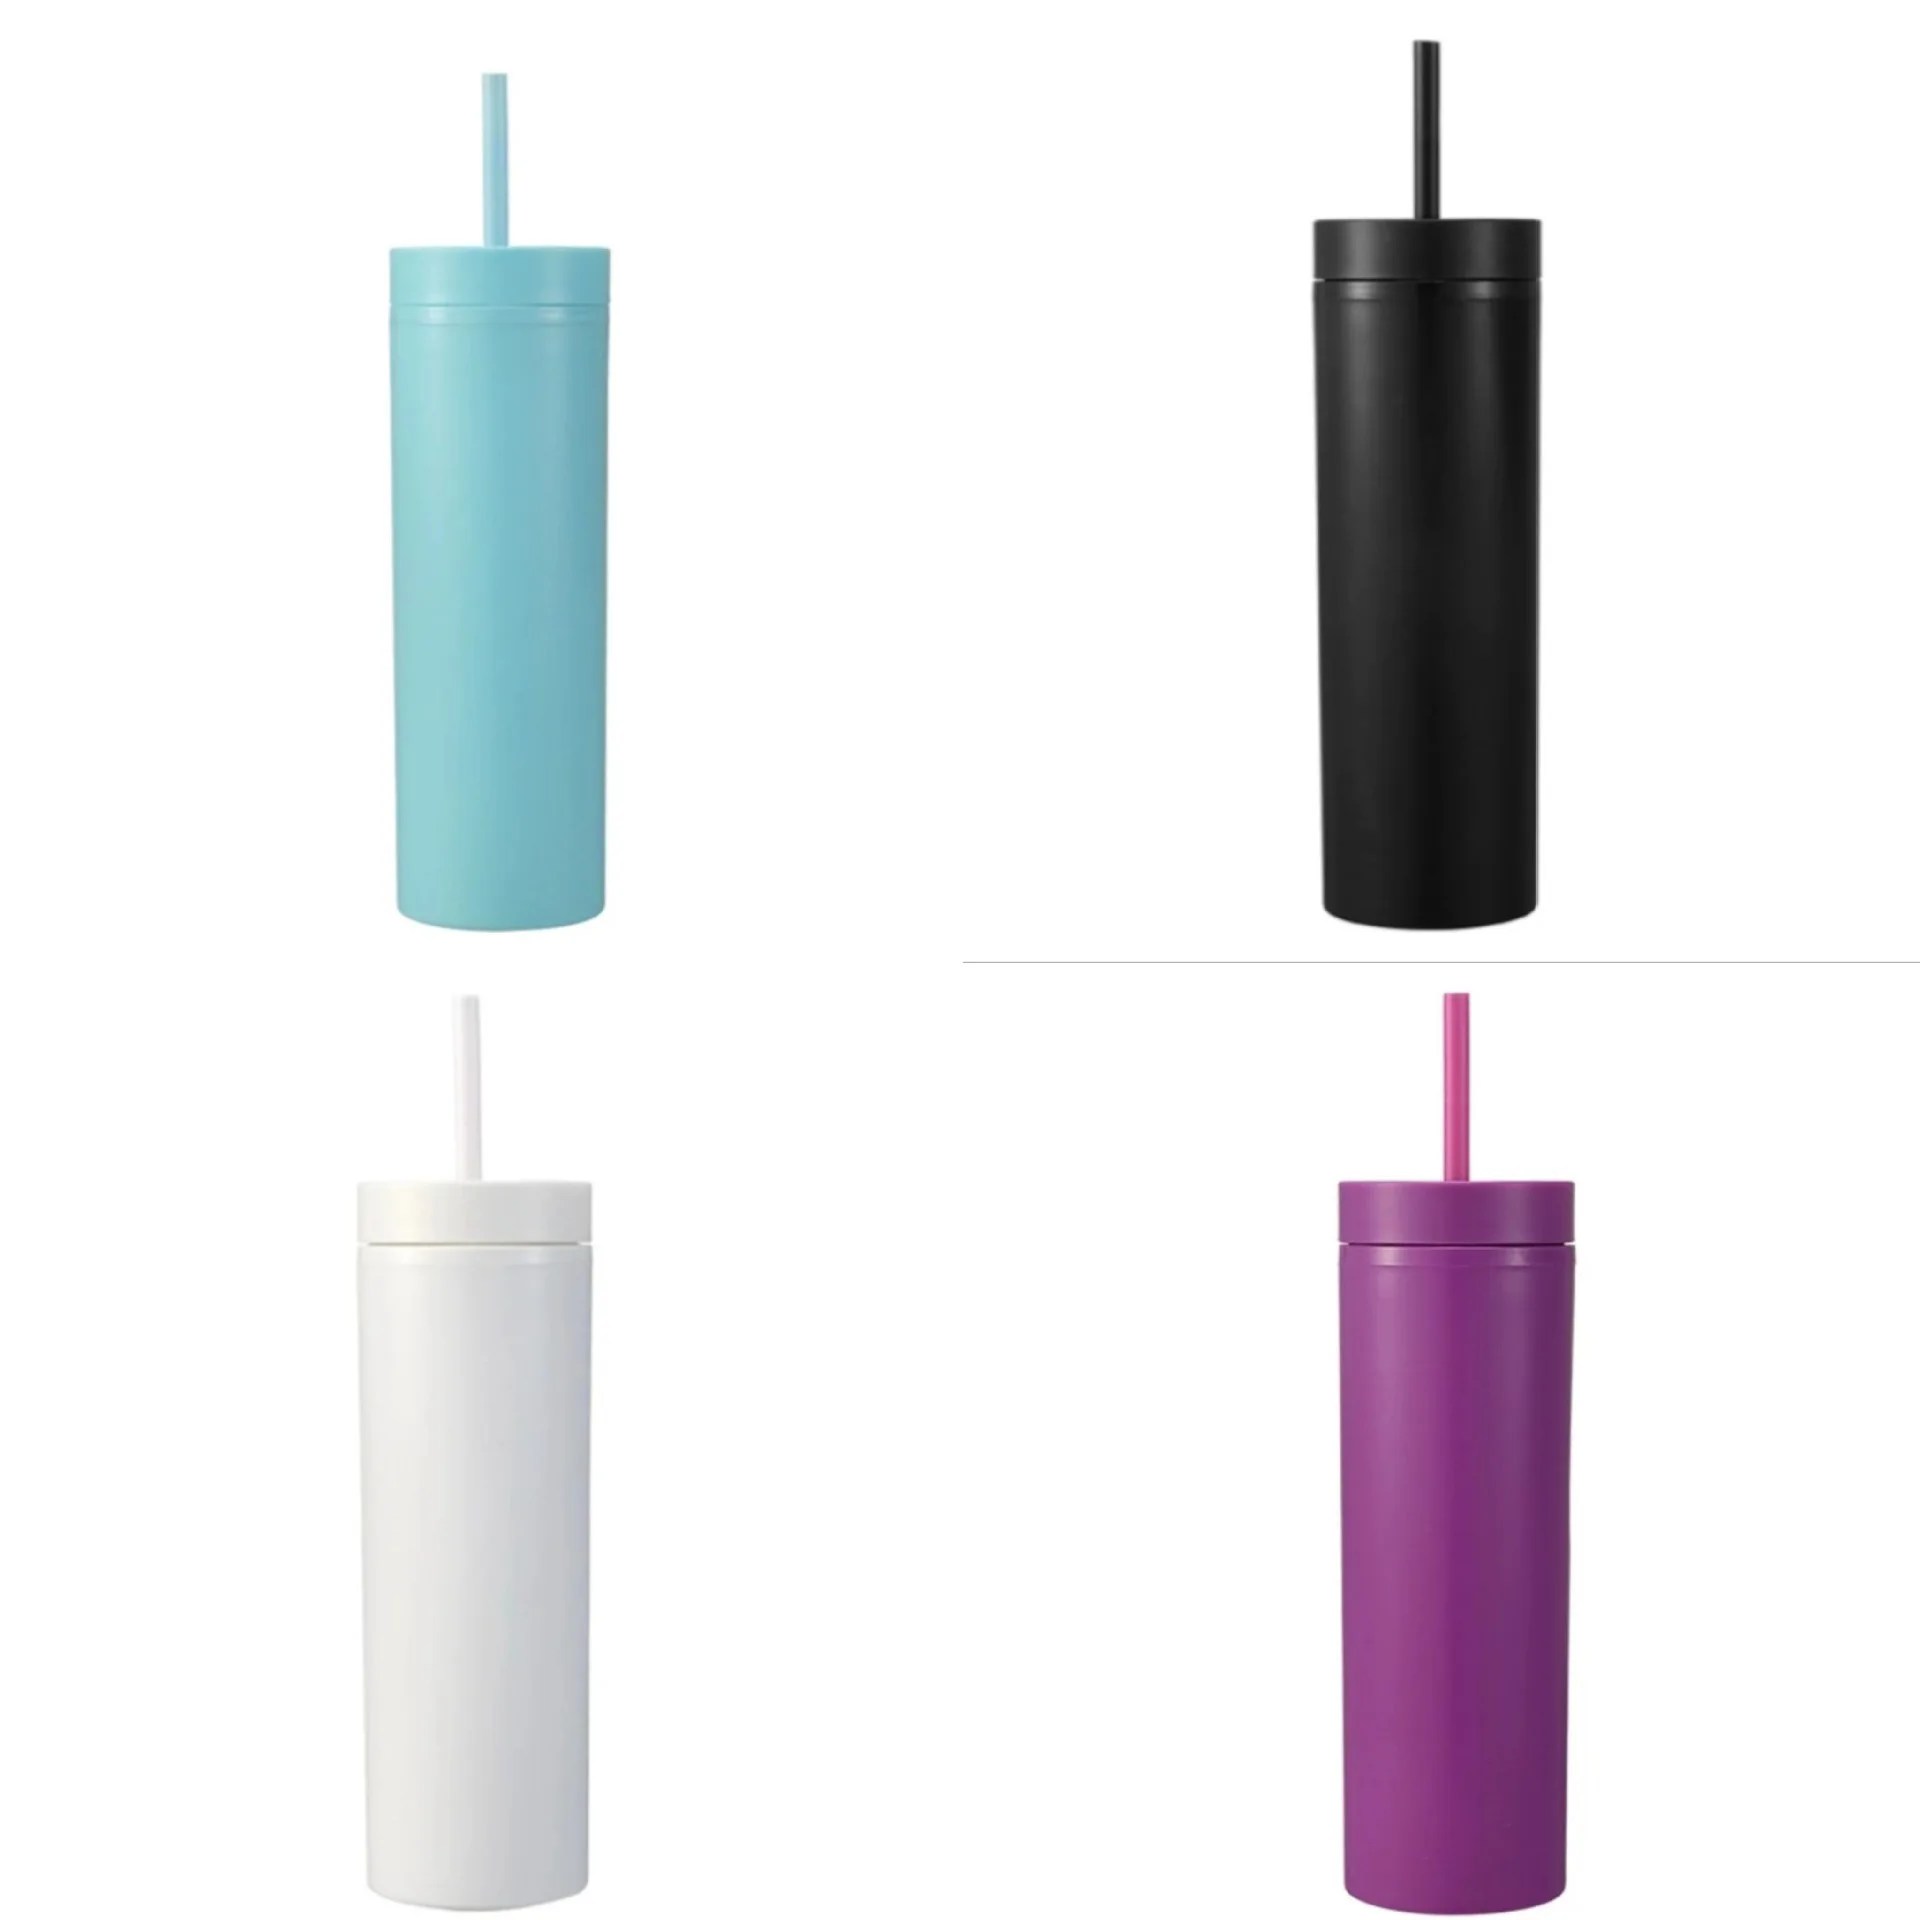 16oz Colored double Wall Plain Matte Colored Acrylic Skinny Tumblers Reusable Travel Mug Cups Water Bottle with Lid